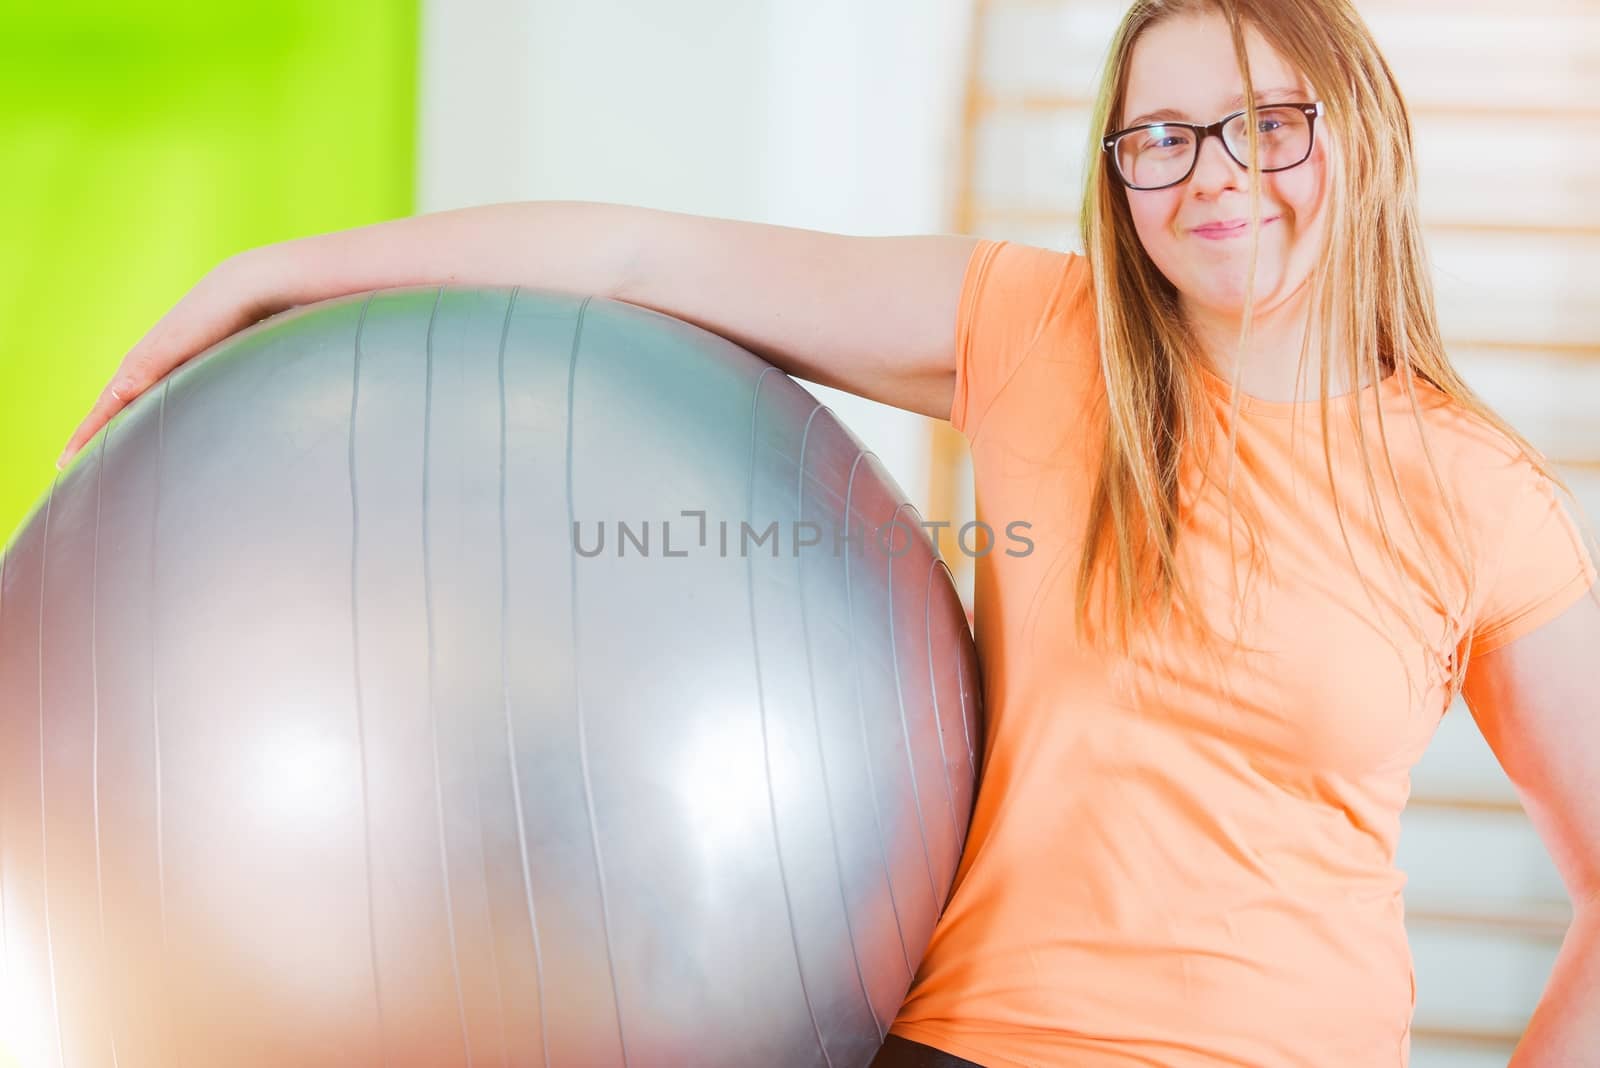 Exercise Ball Time. Young Caucasian Girl with Large Exercise Ball in Hand. Rehabilitation Concept Photo.